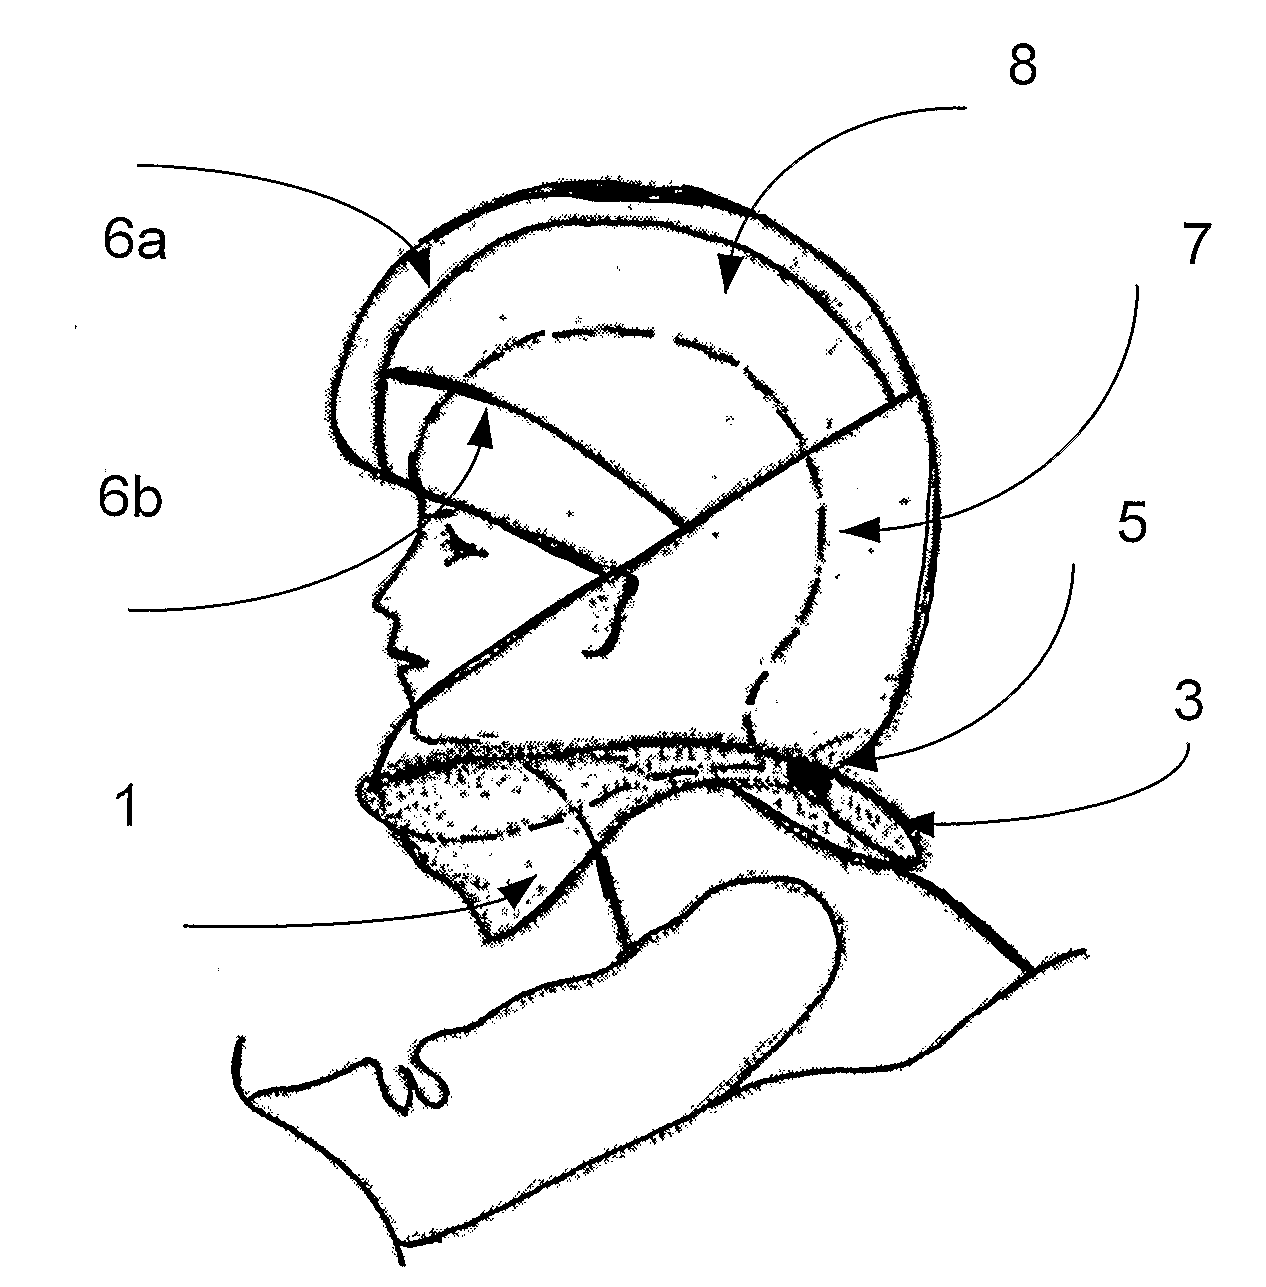 System and Method for Protecting a Bodypart